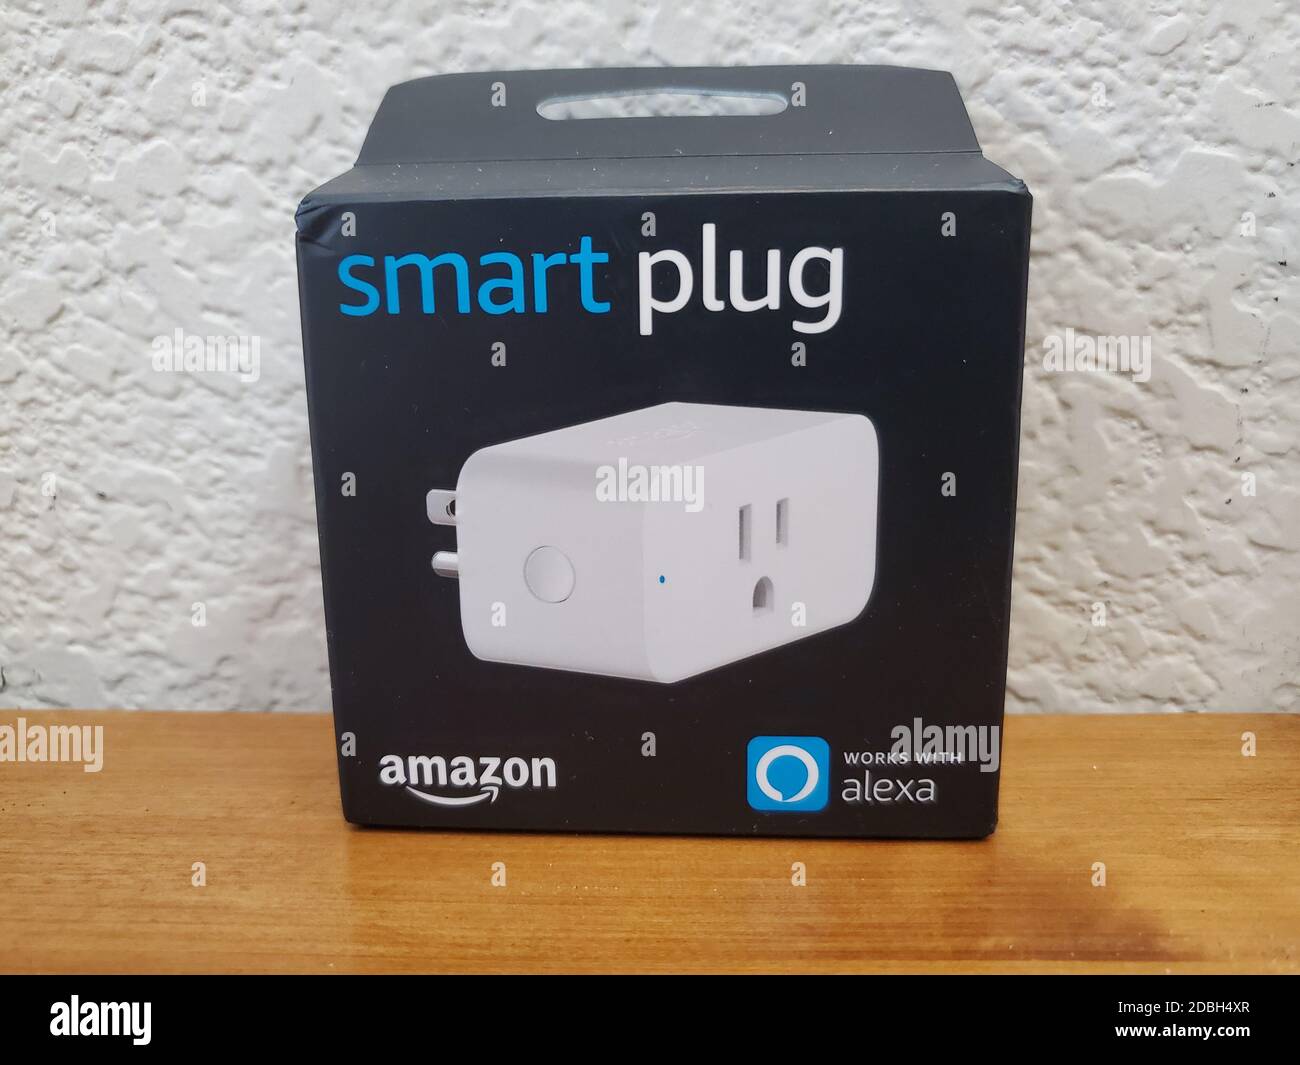 Smart Plug packaging featuring a picture of the Smart Plug, the Amazon logo  and the note 'Works with Alexa', San Ramon, California, November 4, 2020  Stock Photo - Alamy